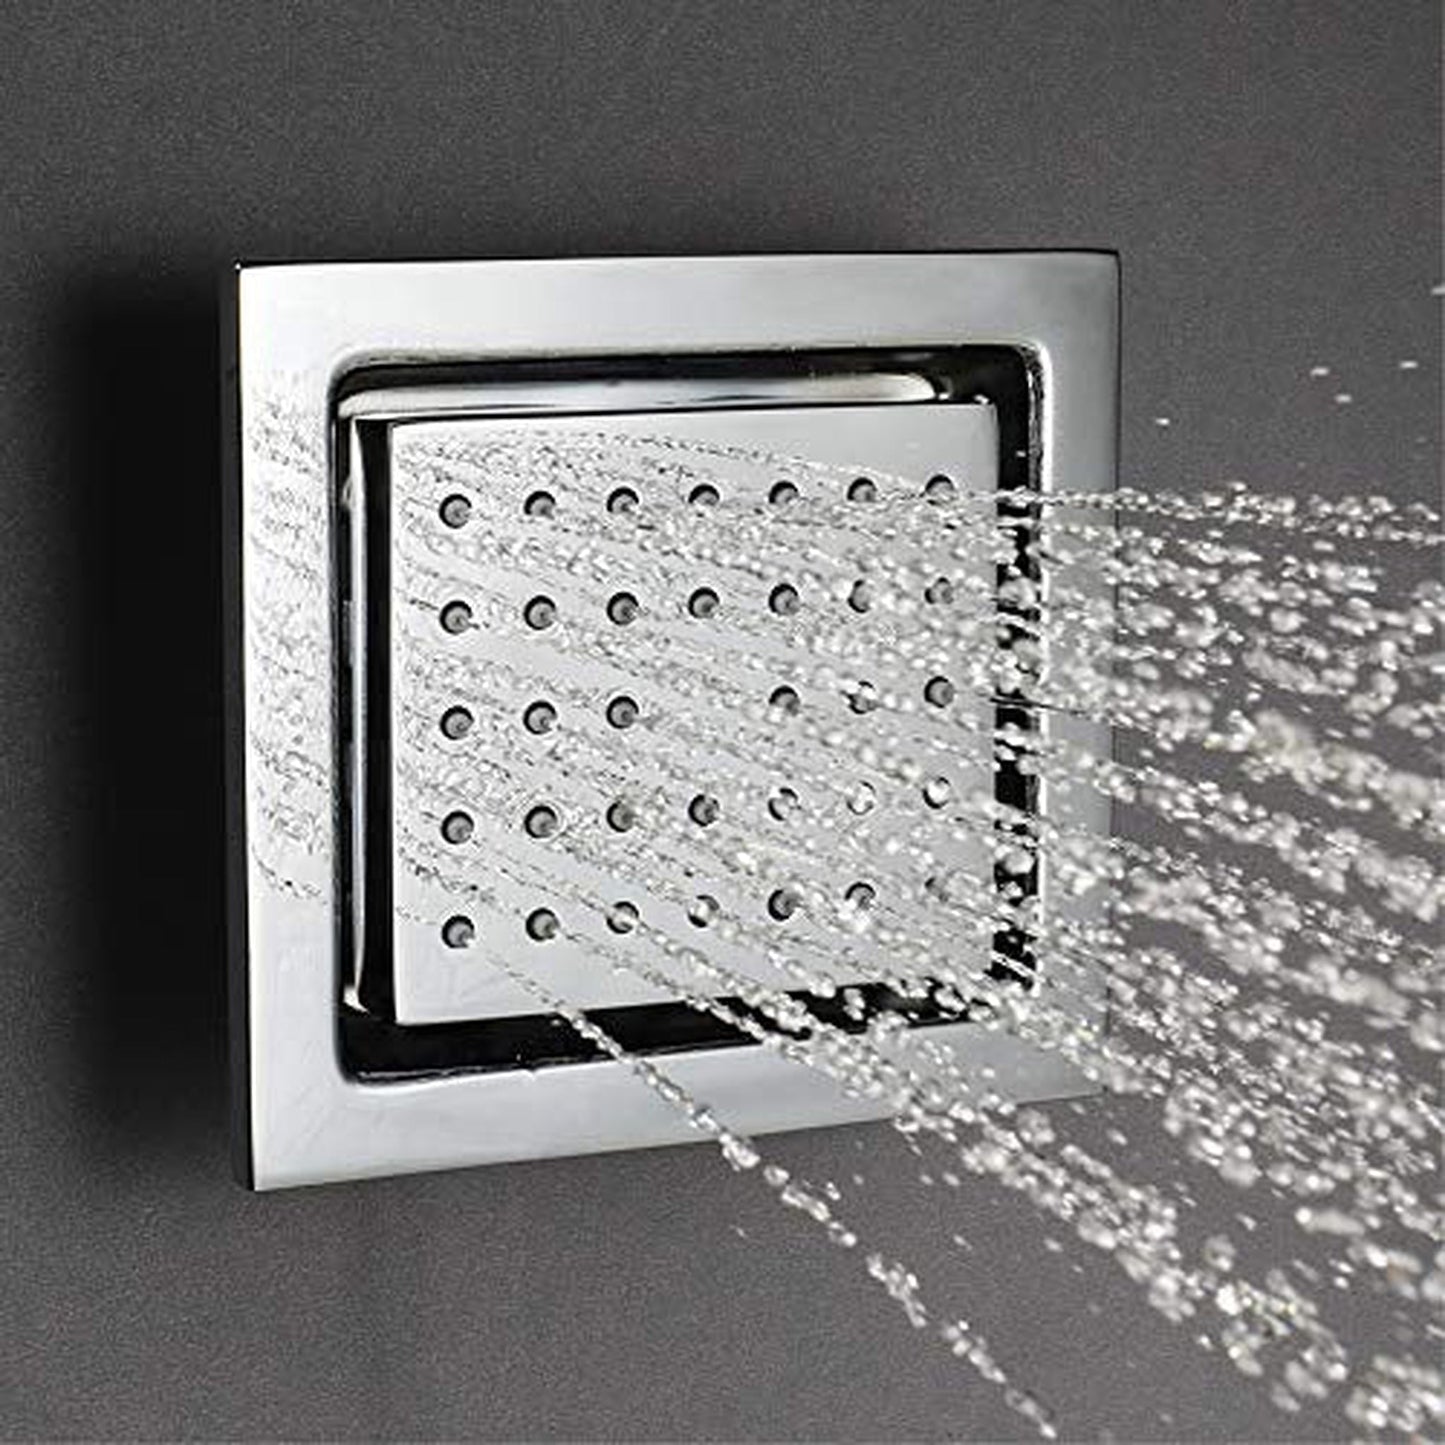 Fontana Martinique Creative Luxury Large Brushed Nickel Rectangular Ceiling Mounted LED Solid Brass Shower Head Rain Shower System With 6-Jet Body Sprays and Hand Shower